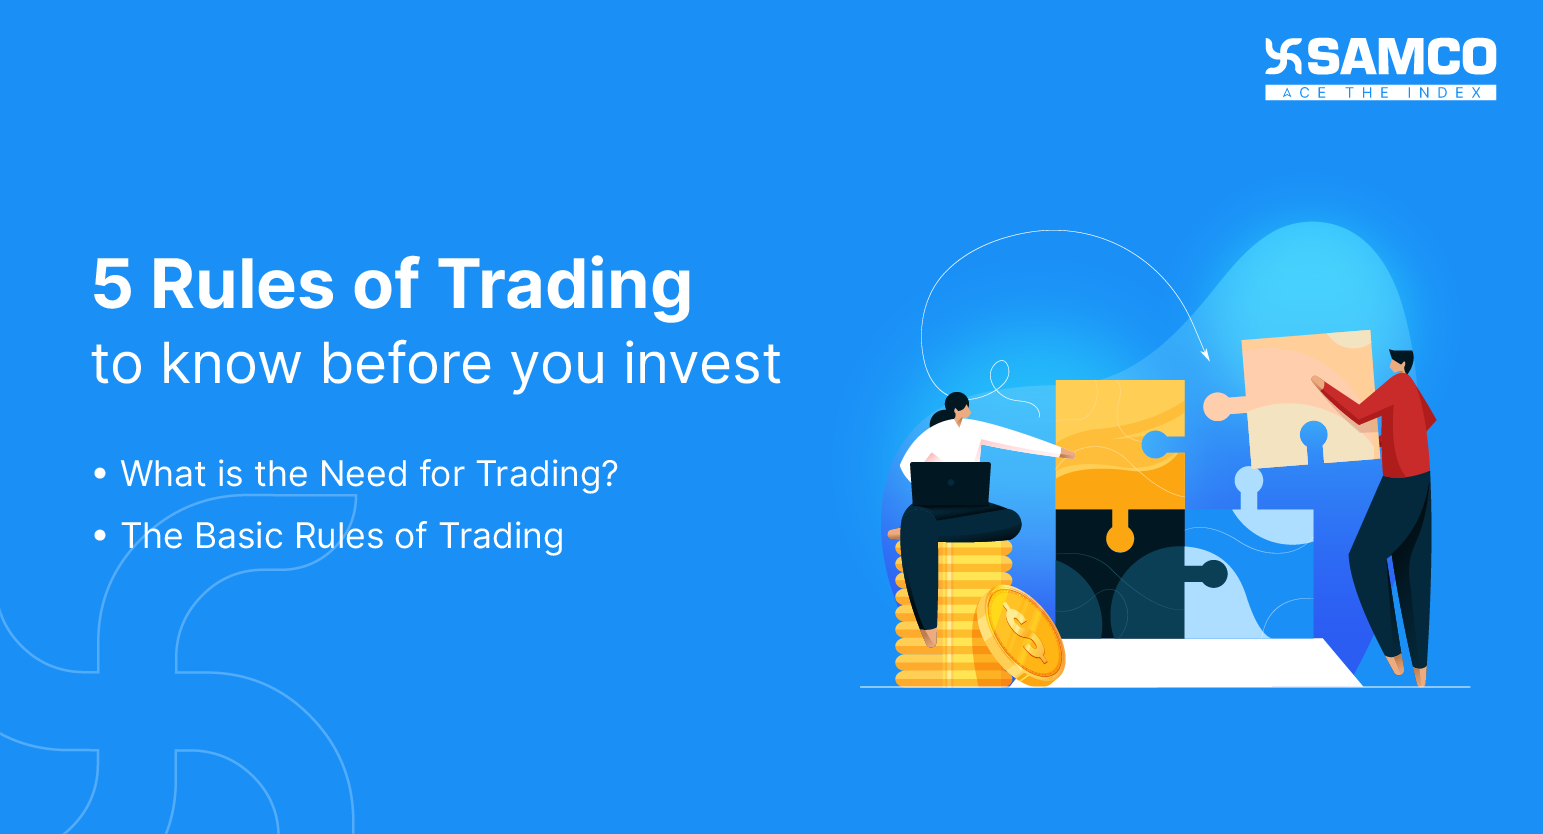 5 Rules of Trading To Know Before You Invest